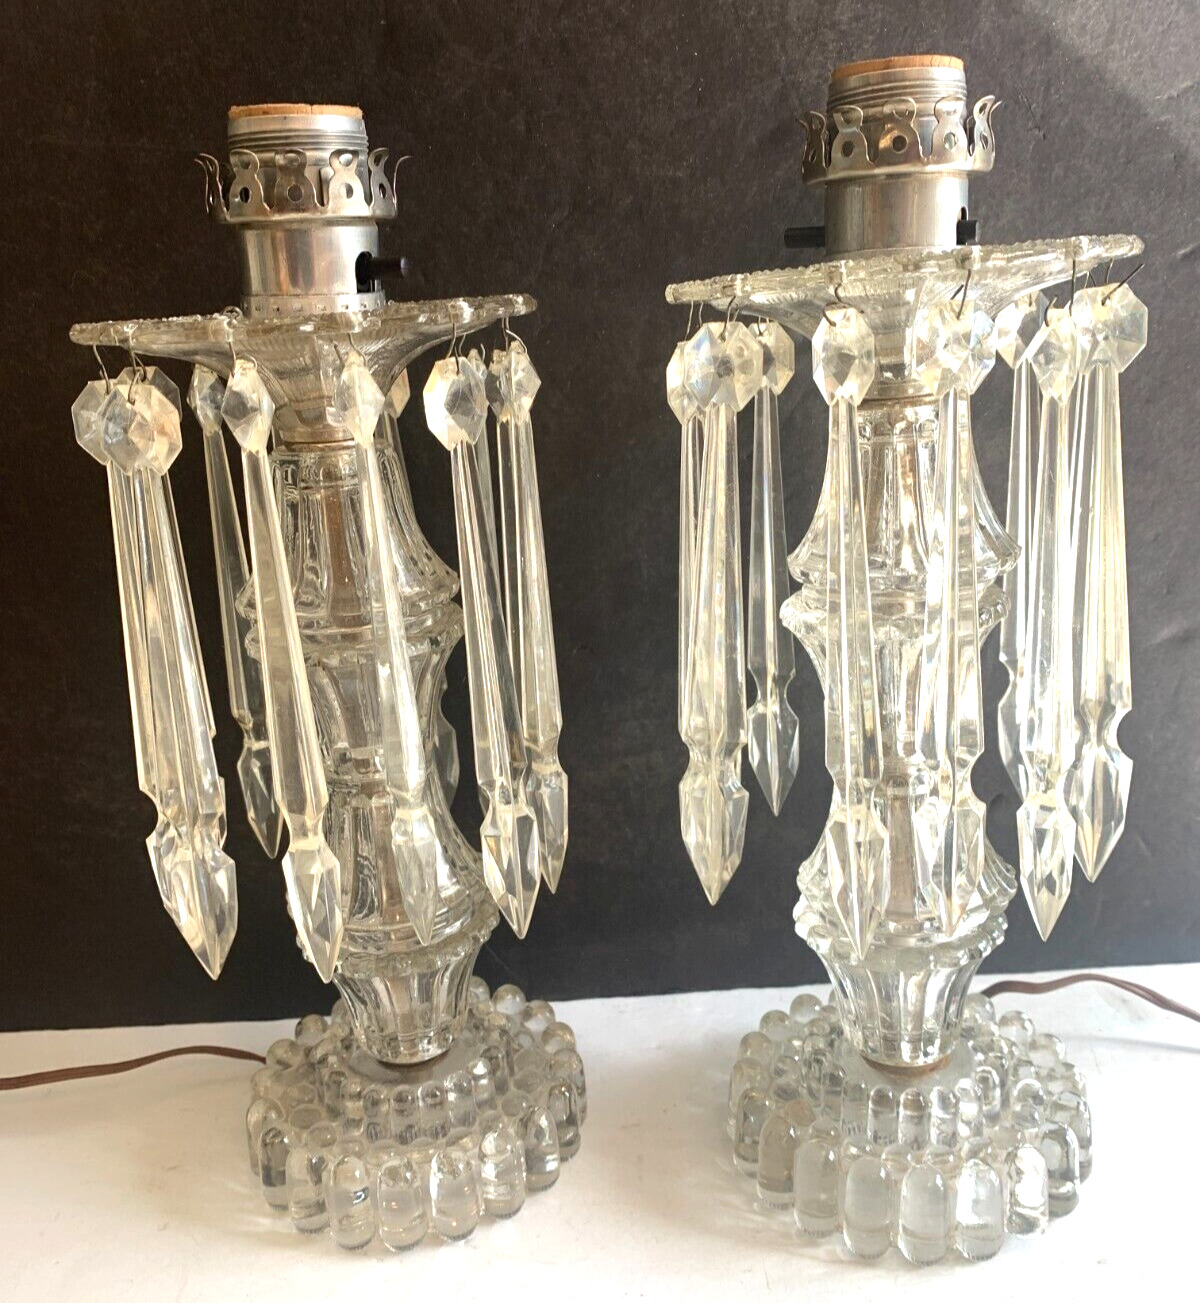 Vintage MCM Cut Glass Hollywood Regency Table Lamps Hanging Spear Prisms PAIR